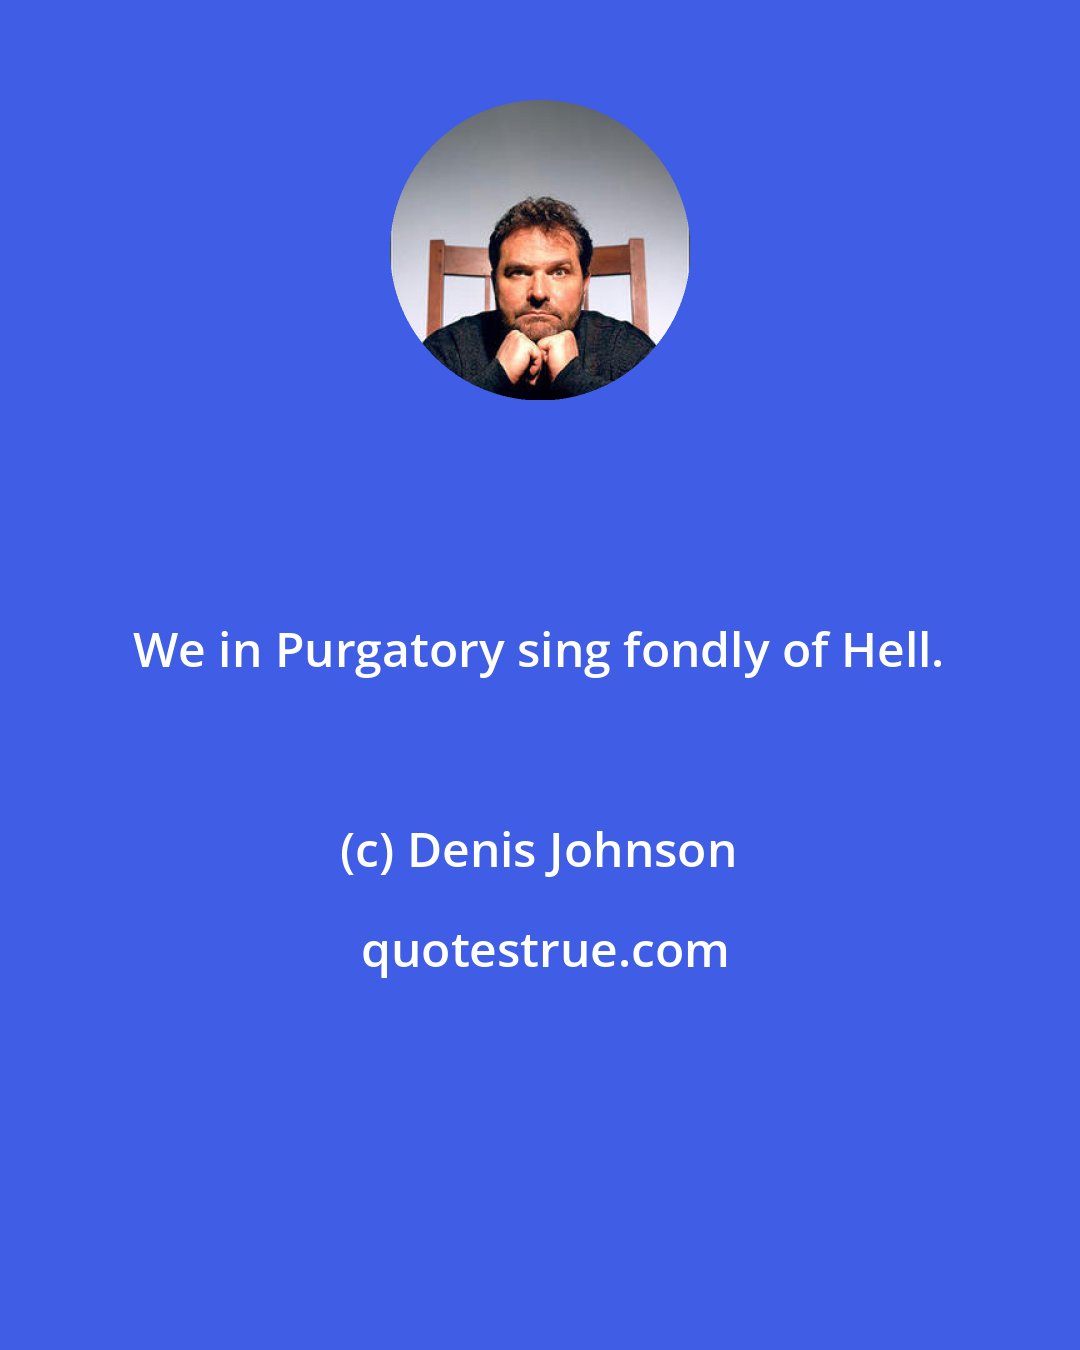 Denis Johnson: We in Purgatory sing fondly of Hell.